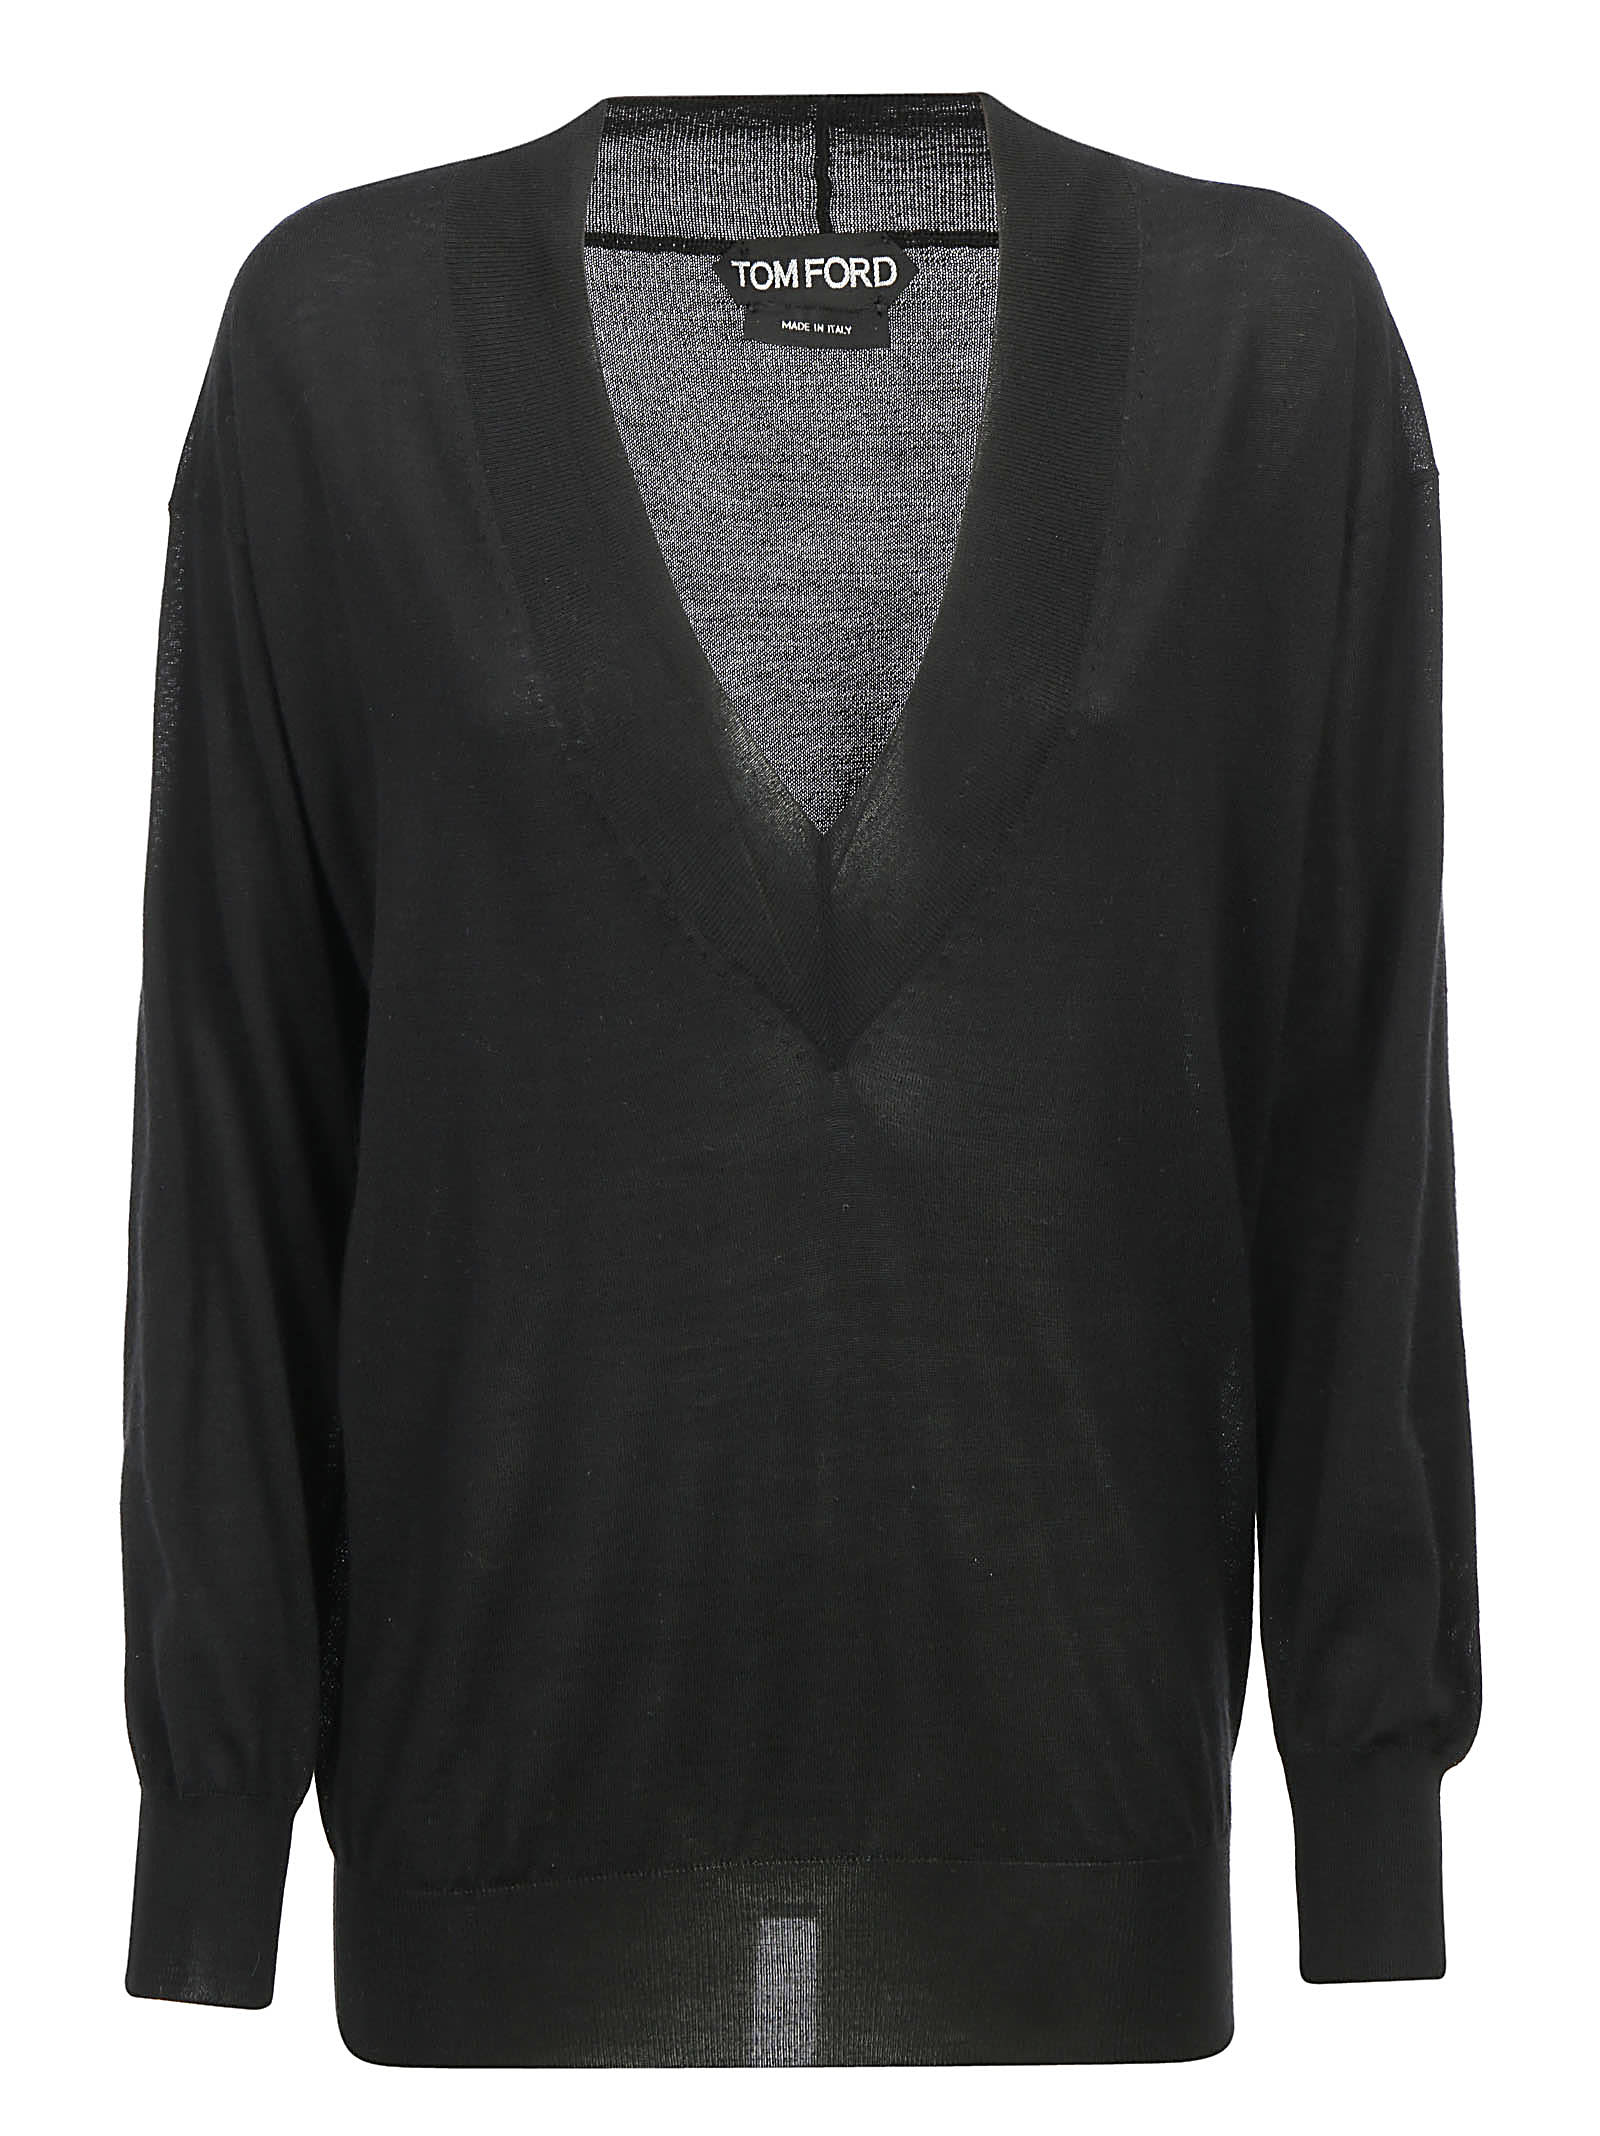 TOM FORD SWEATER,11213723